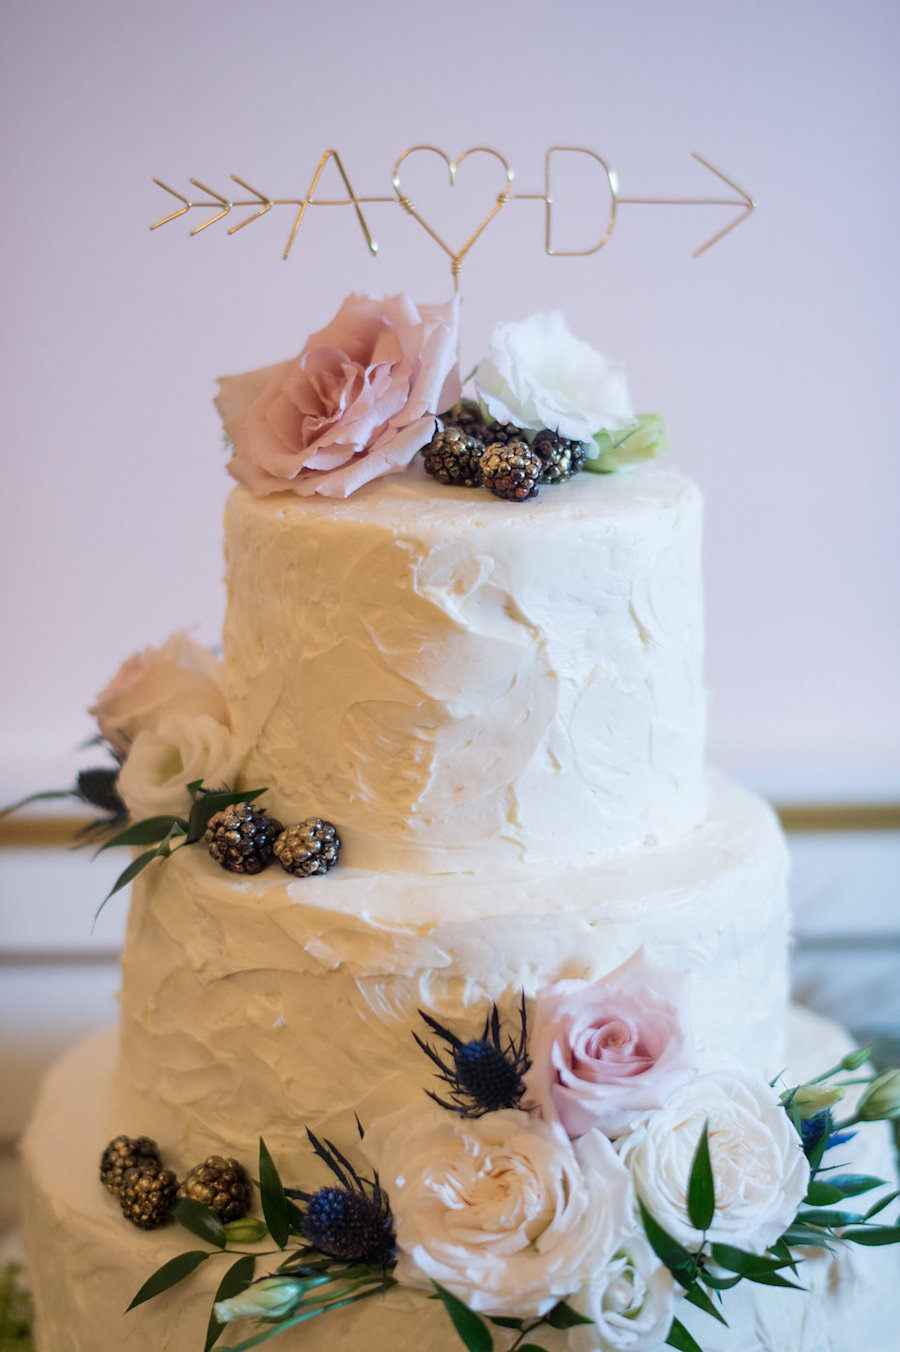 Three Tiered White Wedding Cake with Fresh Rose Floral Accent with Gold Dipped Blackberries and Metal Initial Cake Topper from Olympia Catering